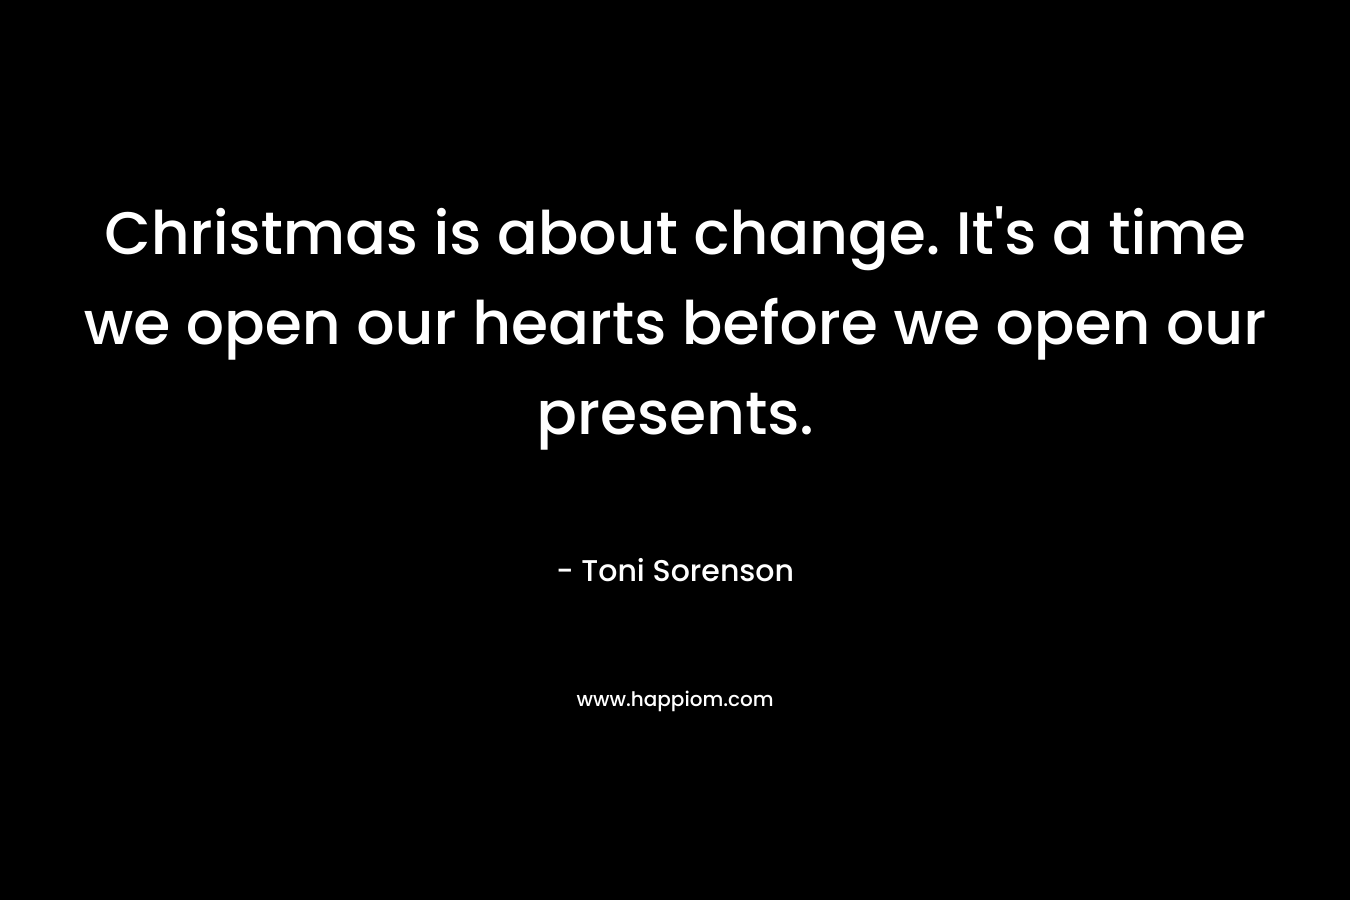 Christmas is about change. It’s a time we open our hearts before we open our presents. – Toni Sorenson